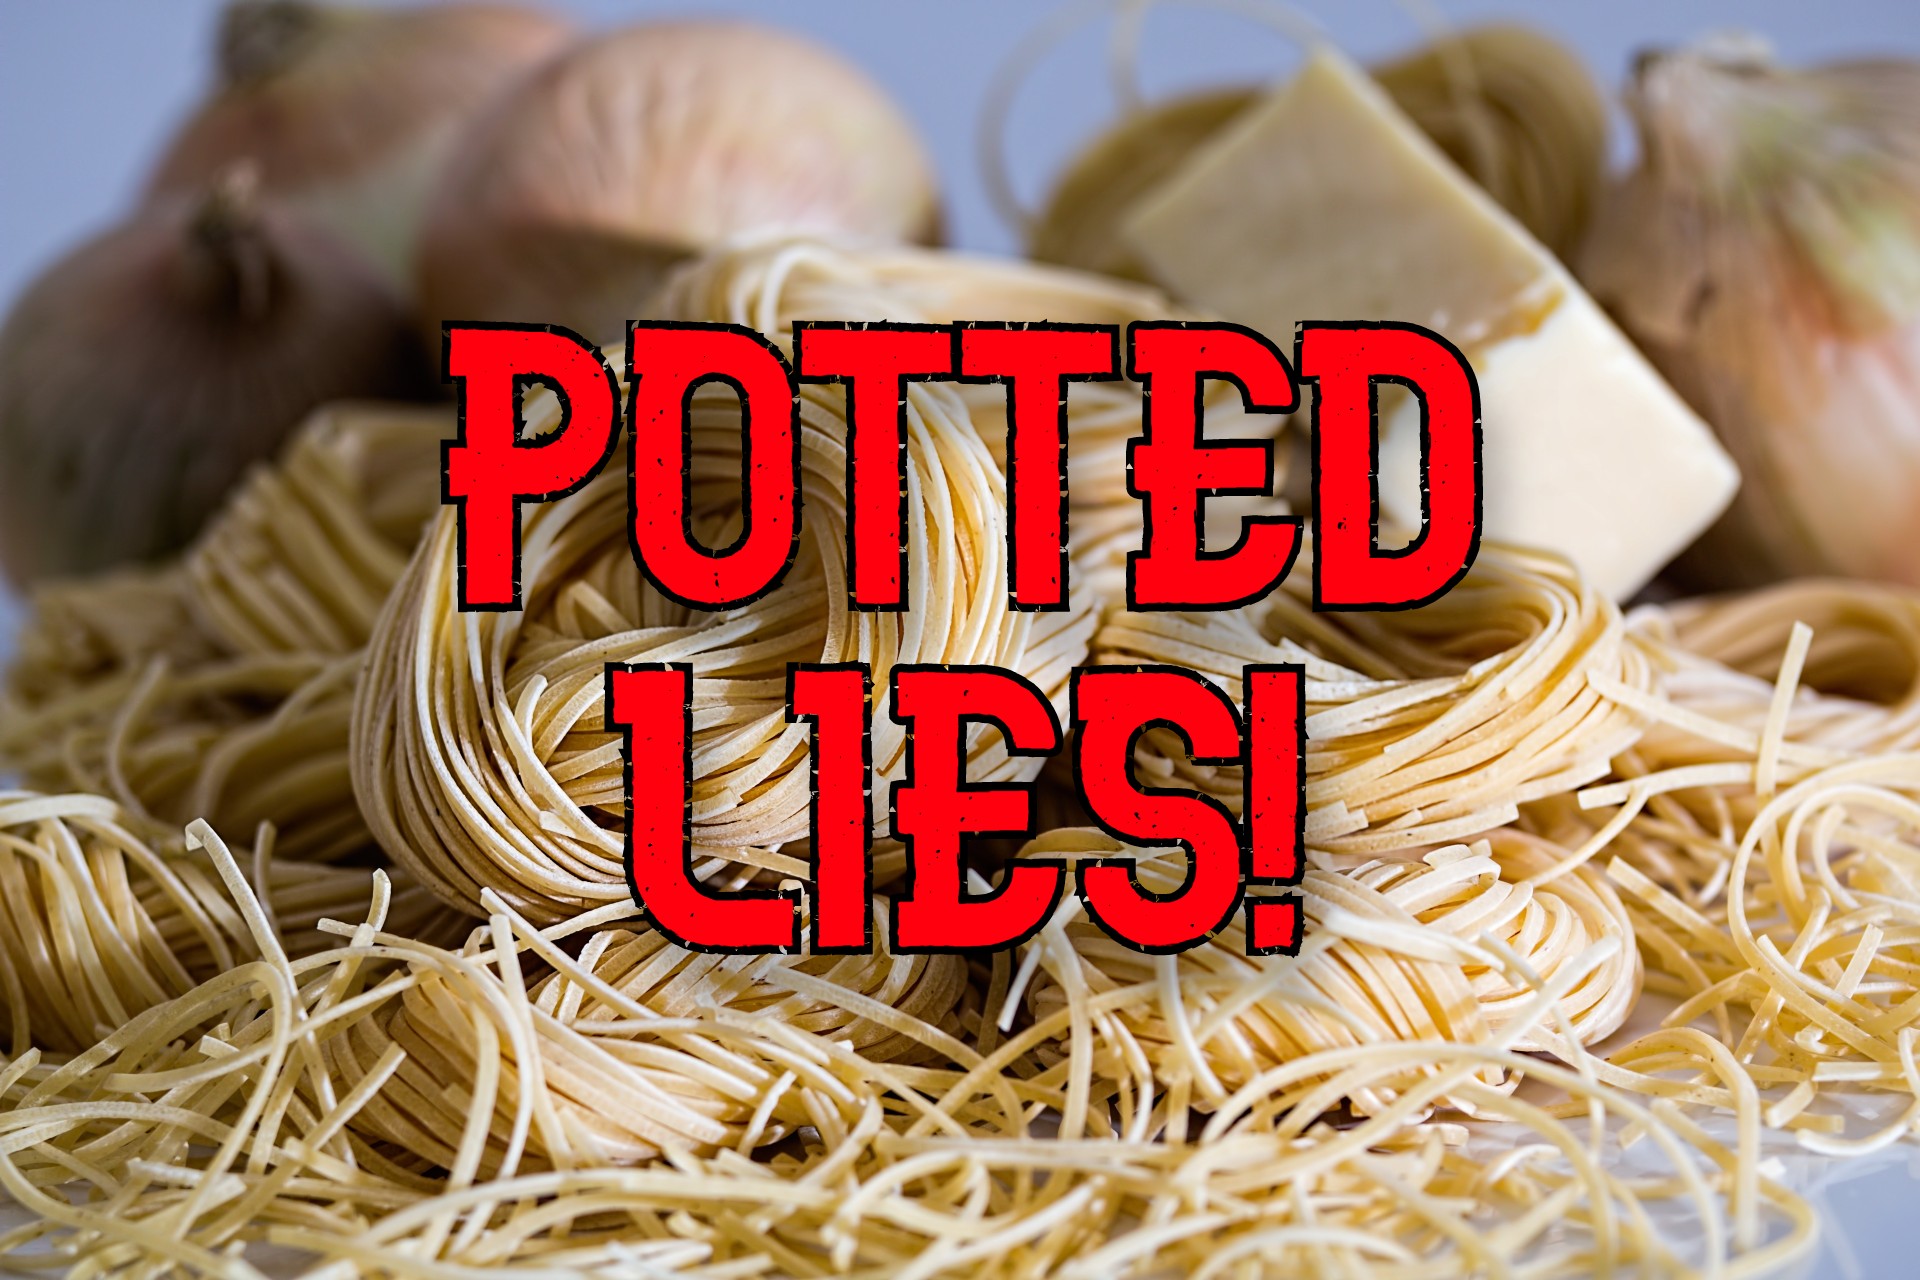 a pile of dry noodles with the slogan "POTTED LIES" overlaid